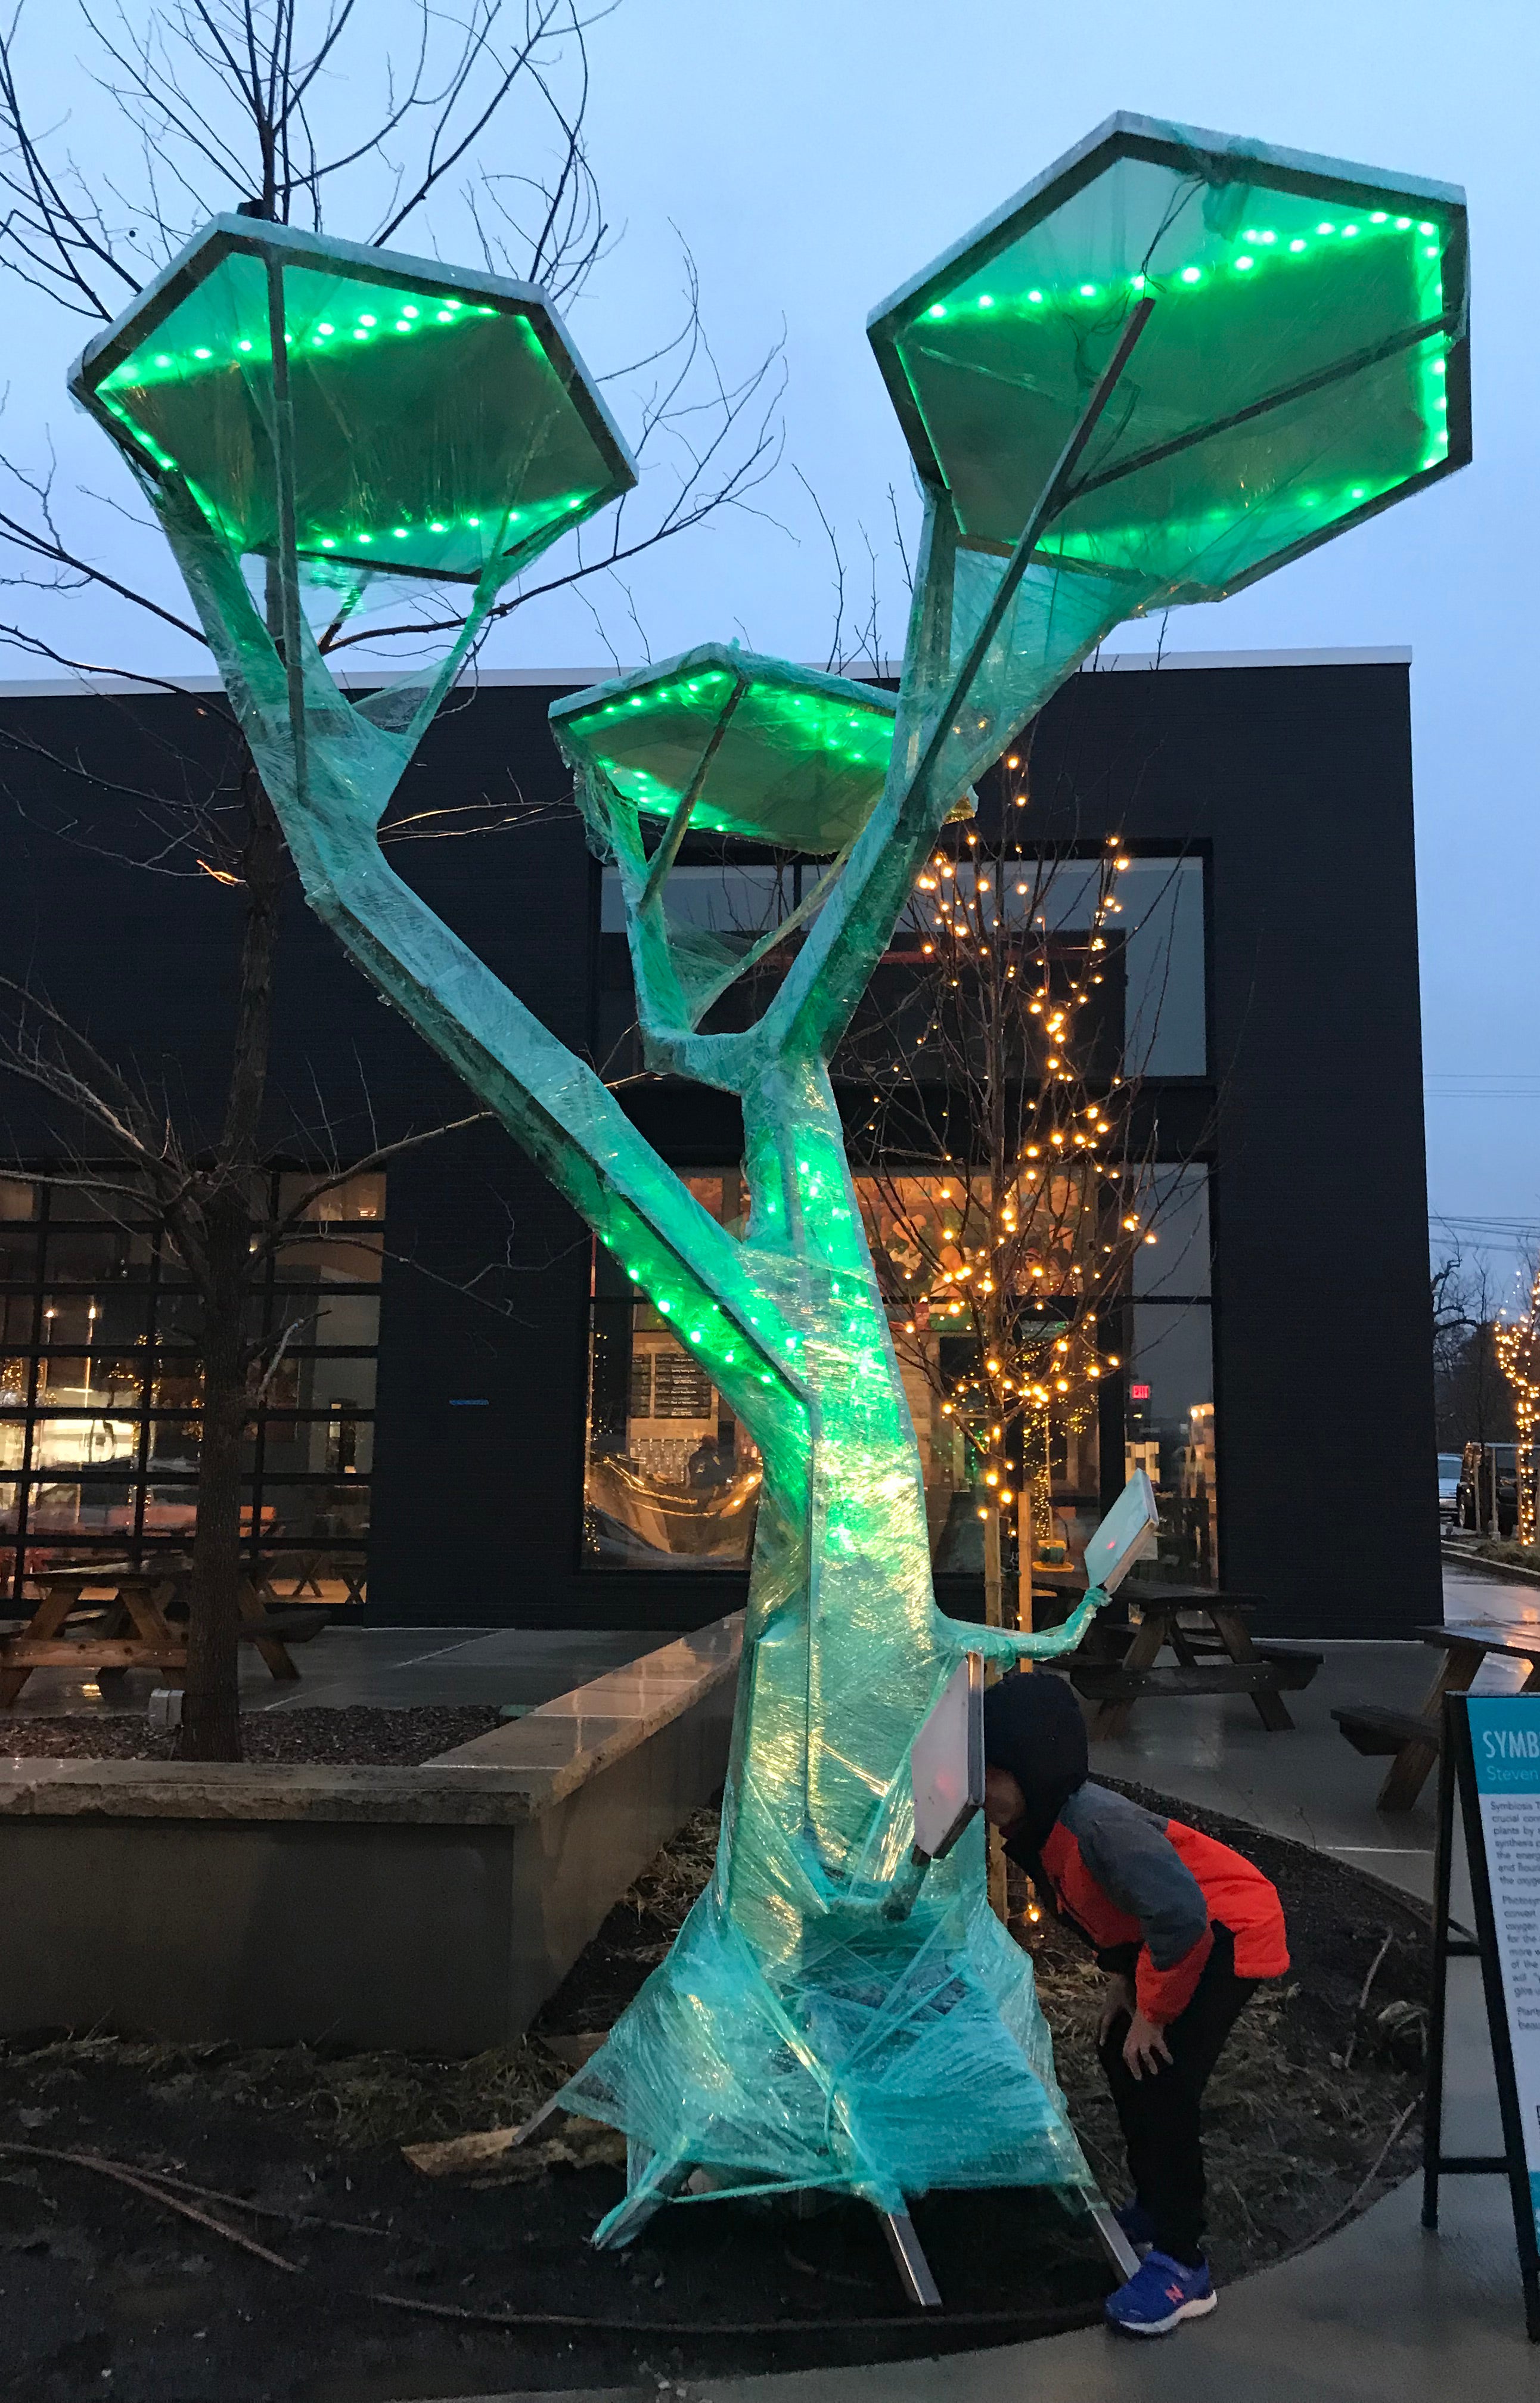 An art installation of wired metal tree sculpture using LEDs to visualize photosynthesis